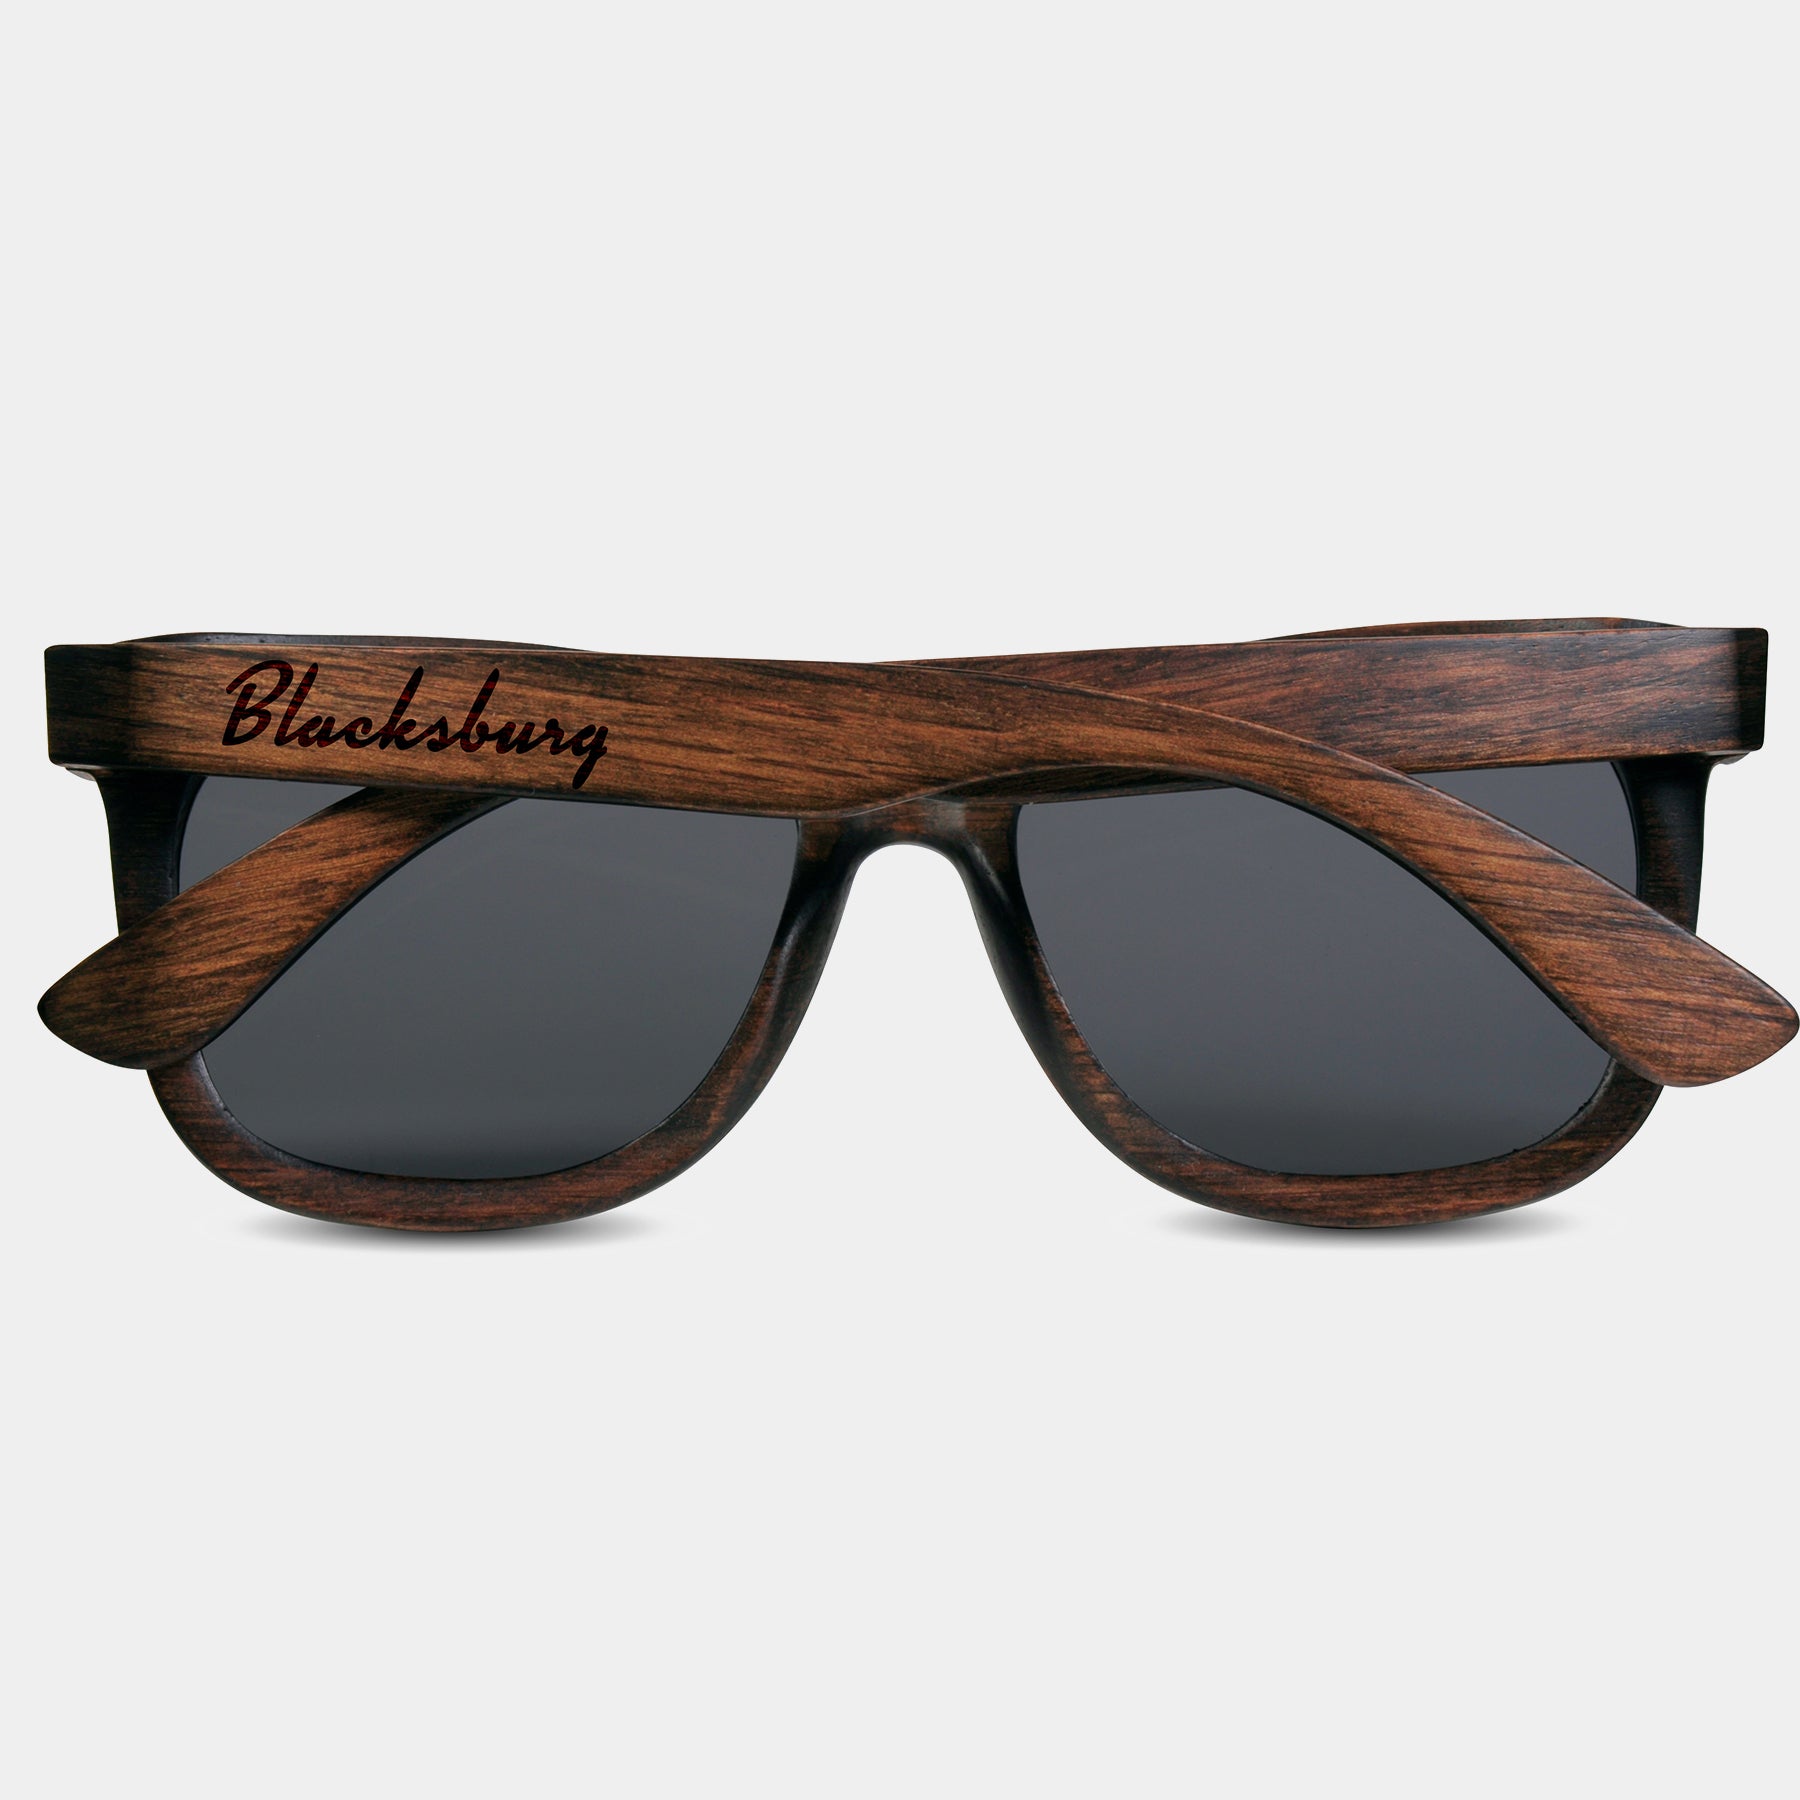 Blacksburg Virginia II Wood Sunglasses with custom engraving.  Add Your Custom Engraving On The Right Side. Blacksburg Virginia II Custom Gifts For Men - Blacksburg Virginia II Sustainable Wayfarer Eyewear and Shades Front View